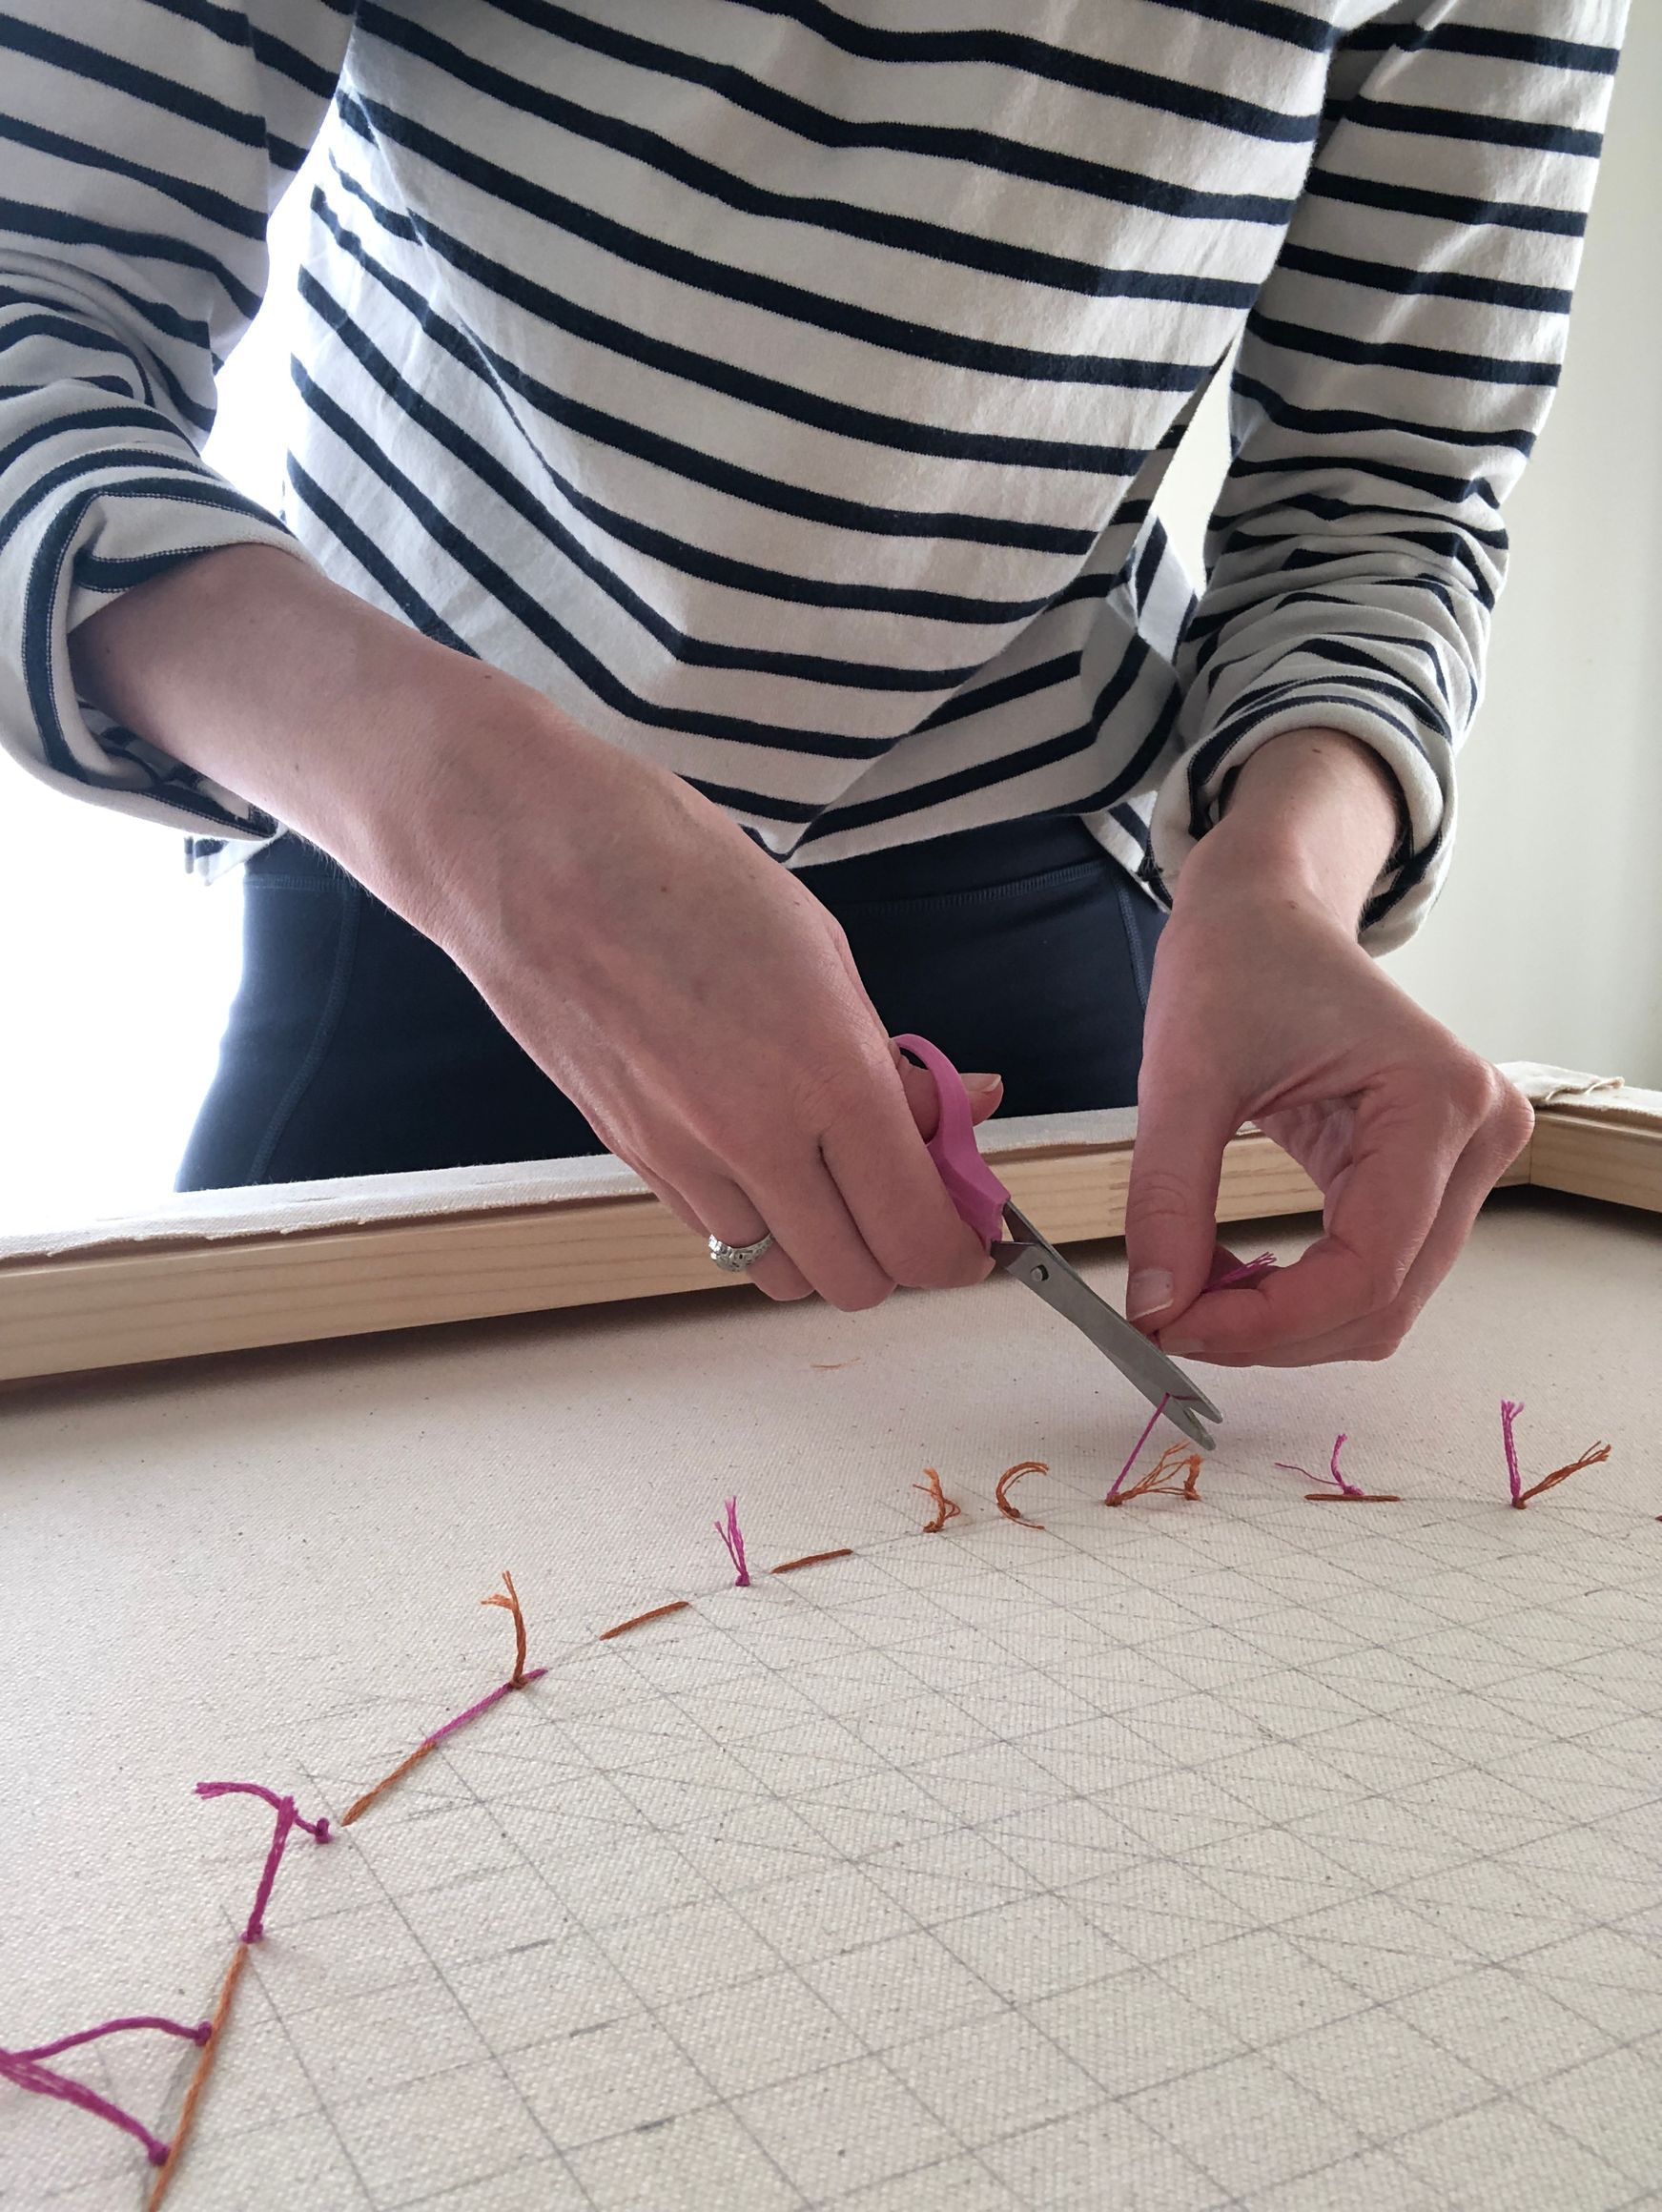 Emily Keating Snyder in her studio cutting the lose edges on the back of the piece after she is finished embroidering the front. The image is a close up of her hands with a pair of scissors in one hand and loose embroidery floss in the other 